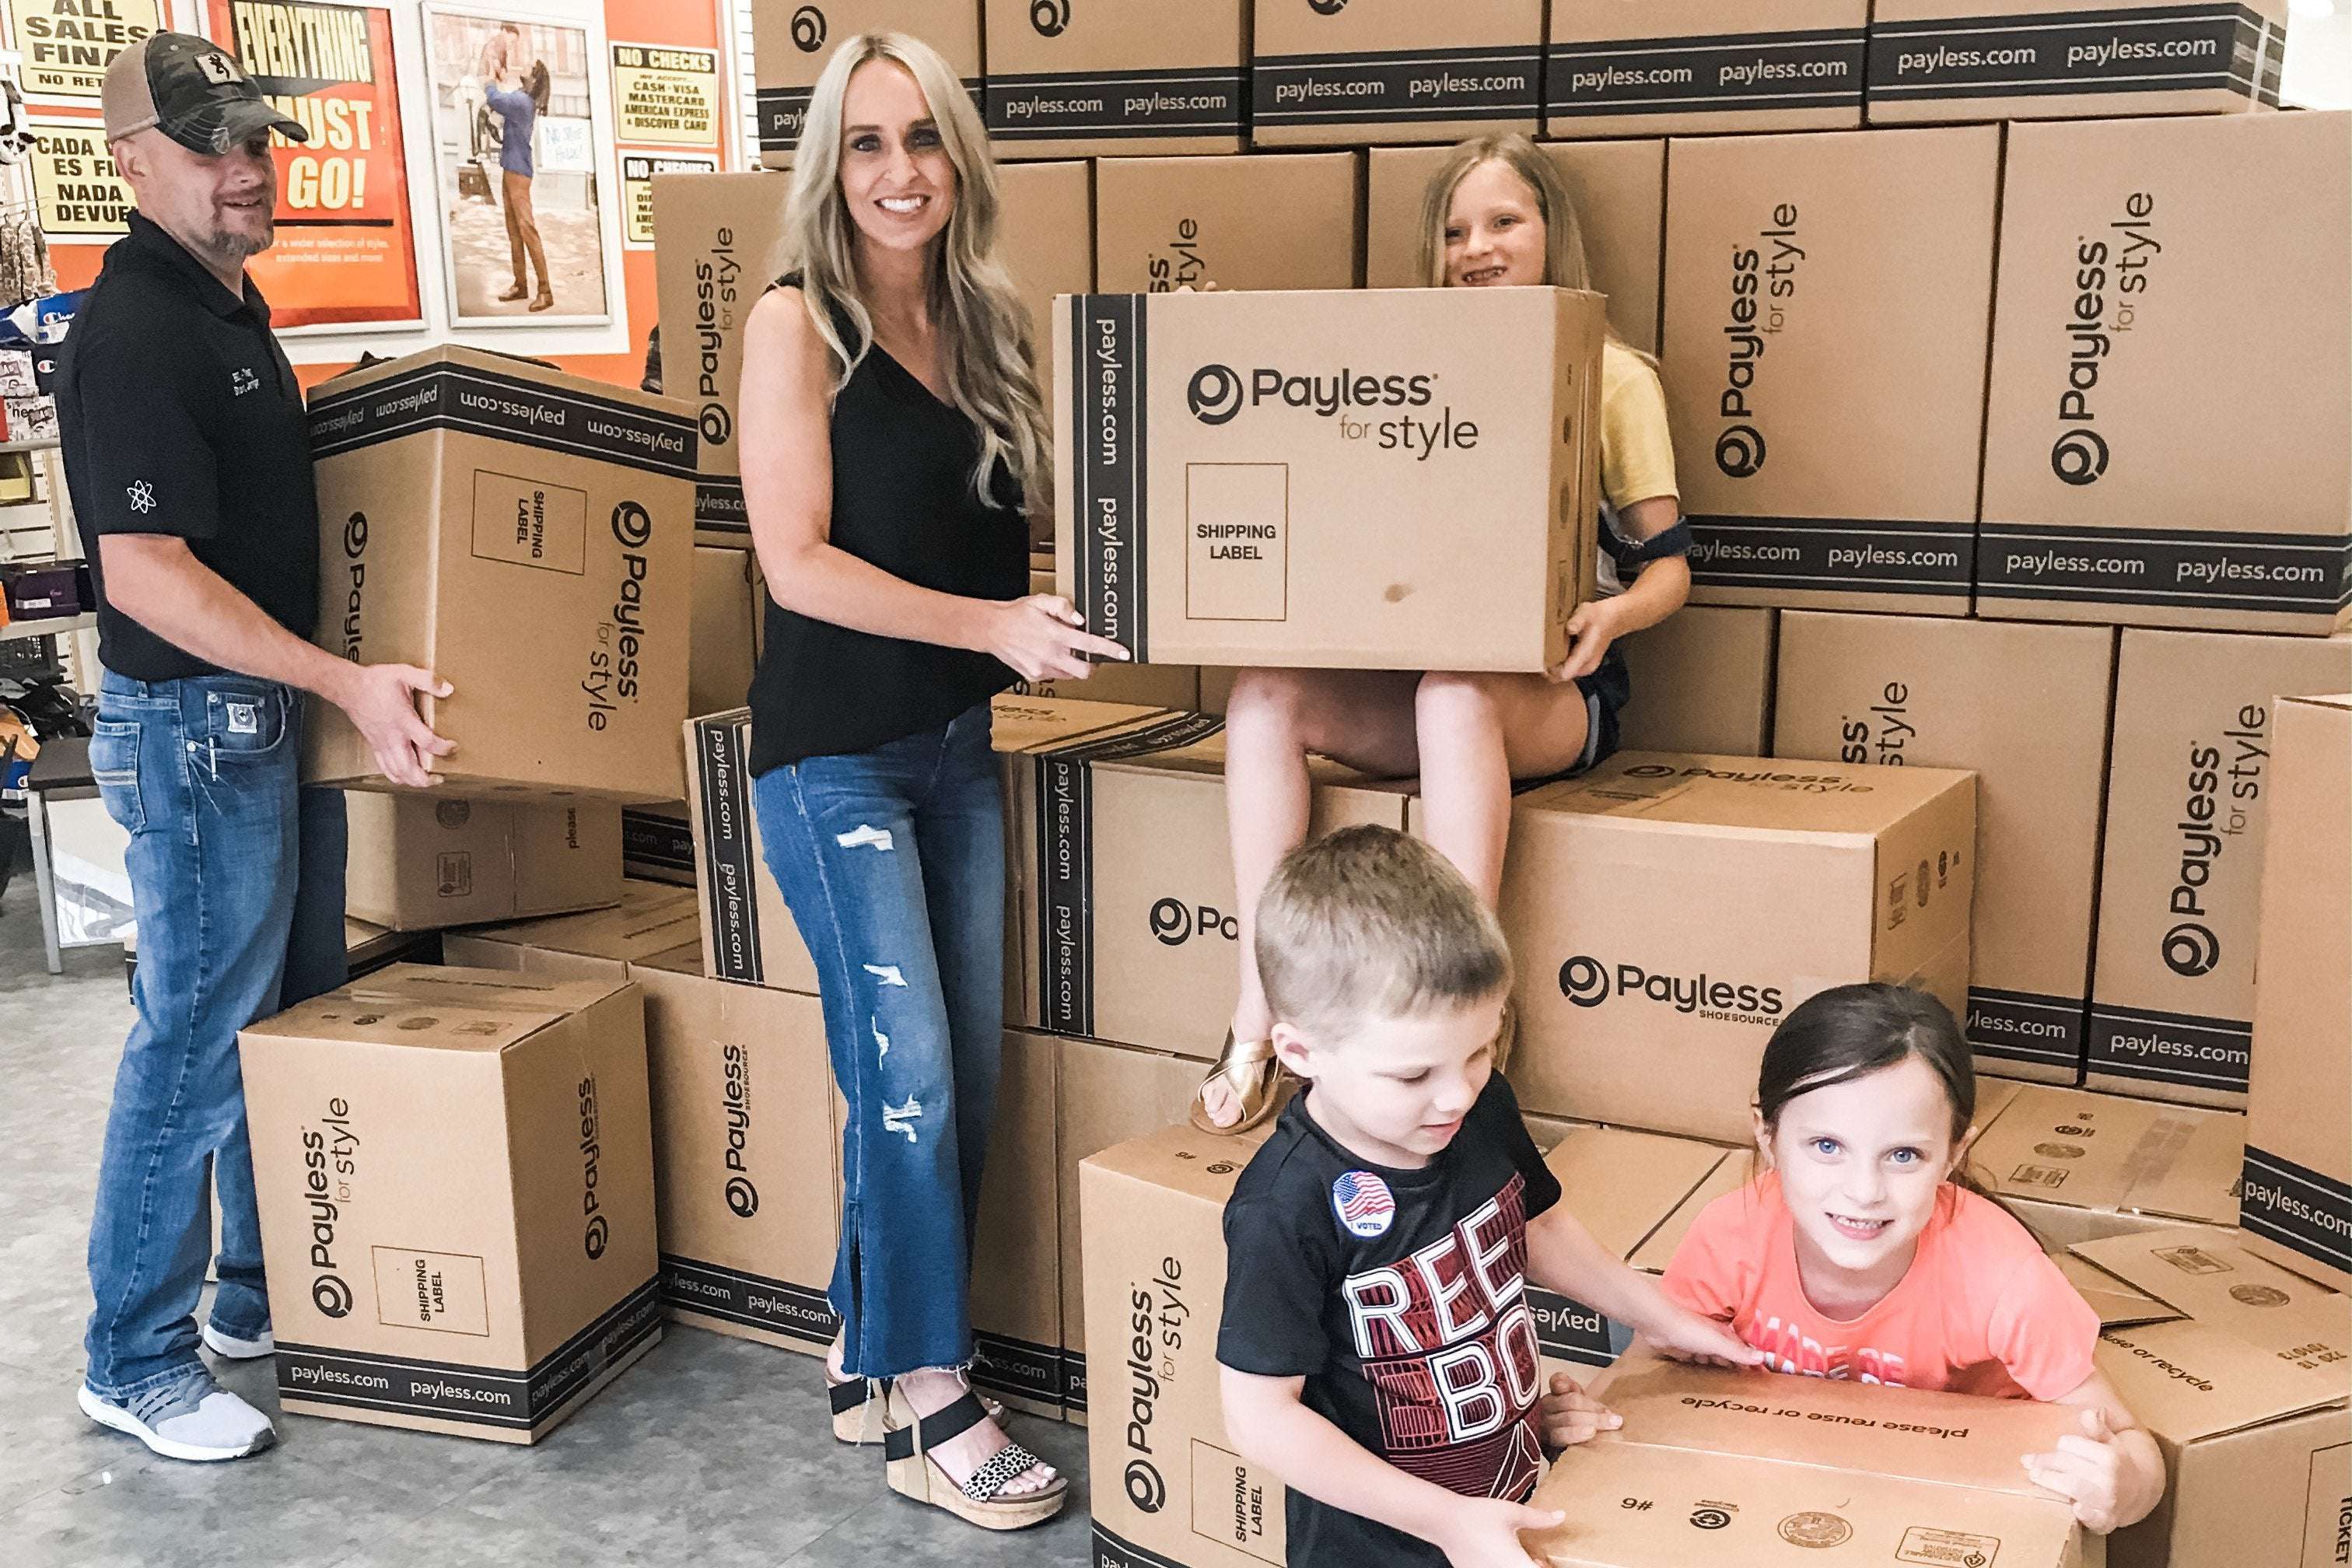 image for An Arkansas Lawyer Bought 1,500 Pairs of Shoes From a Payless Going Out of Business. Now She's Donating Them to Kids in Need